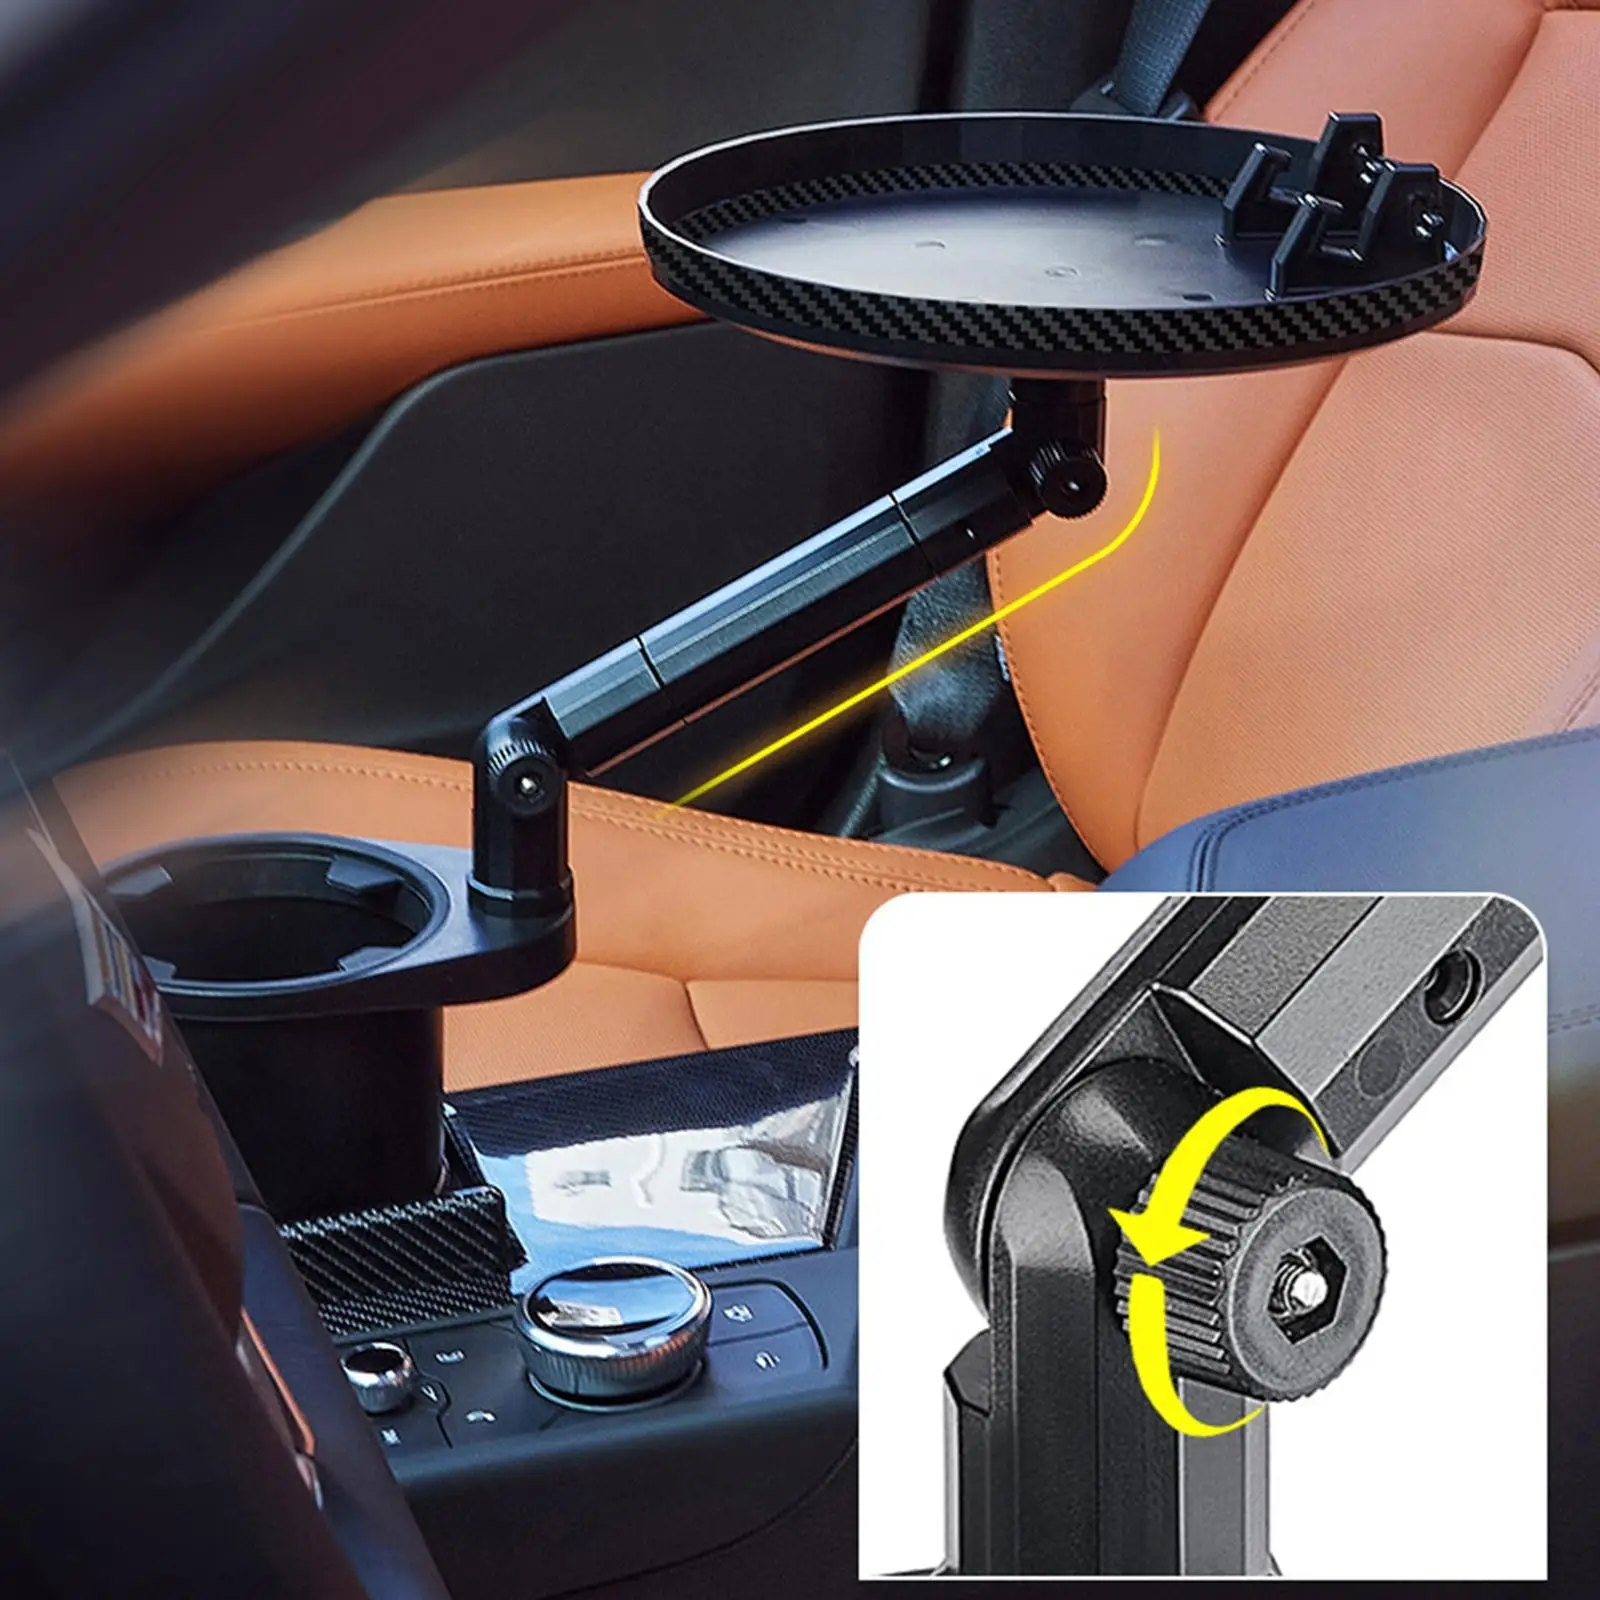 Universal Car Cup Holder Tray Insert 360 Rotating Detachable Food Tray for Drinks Bottle Fits Most Cars Organizer Black